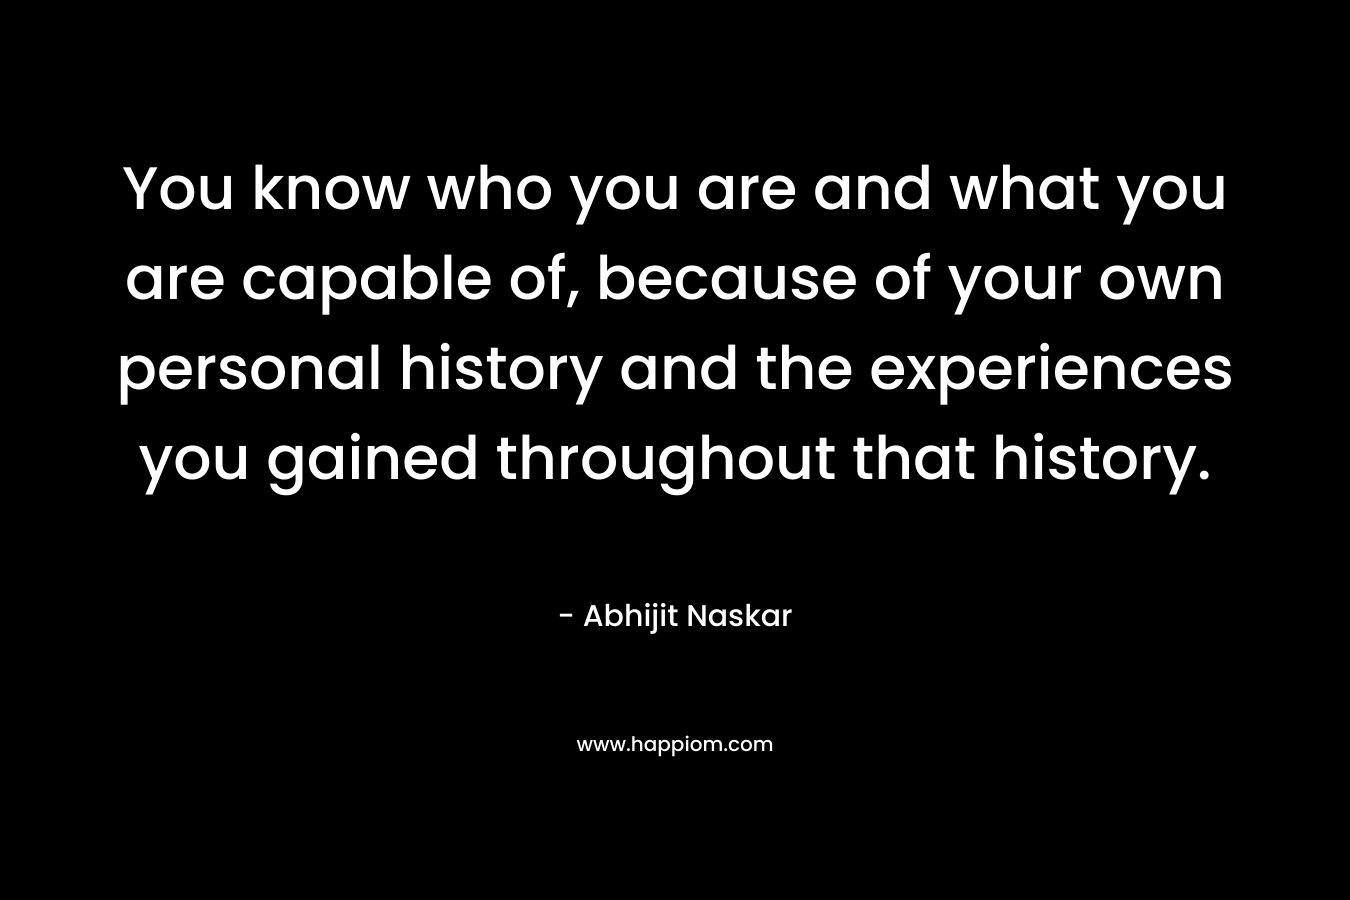 You know who you are and what you are capable of, because of your own personal history and the experiences you gained throughout that history.